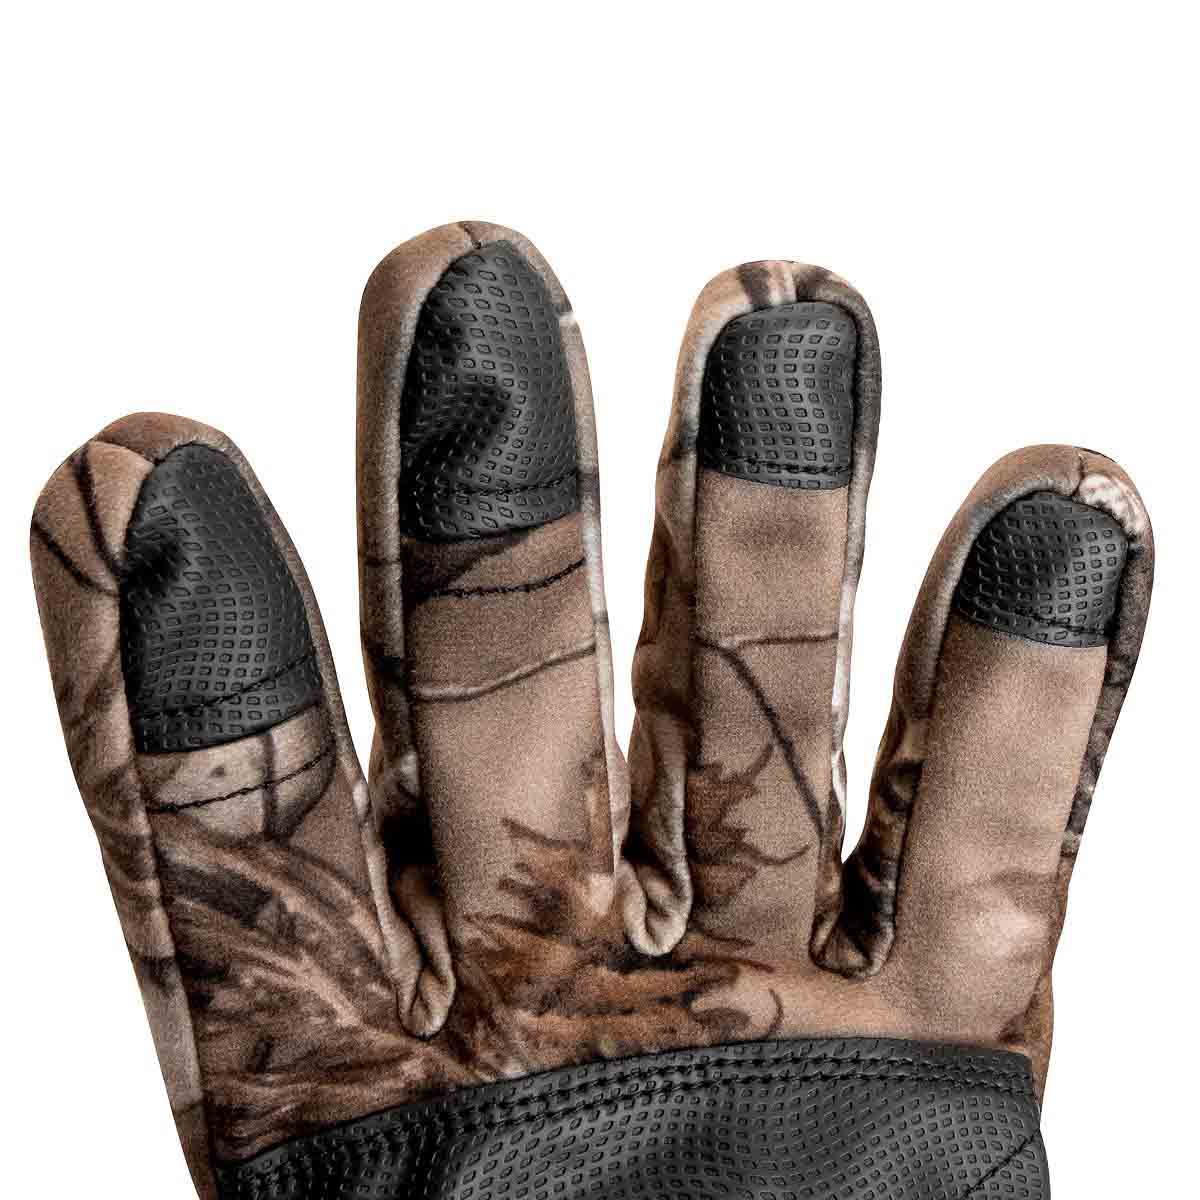 The Microfleece Insulated Waterproof Slit Fingergloves feature synthetic leather grip on the palm and fingers